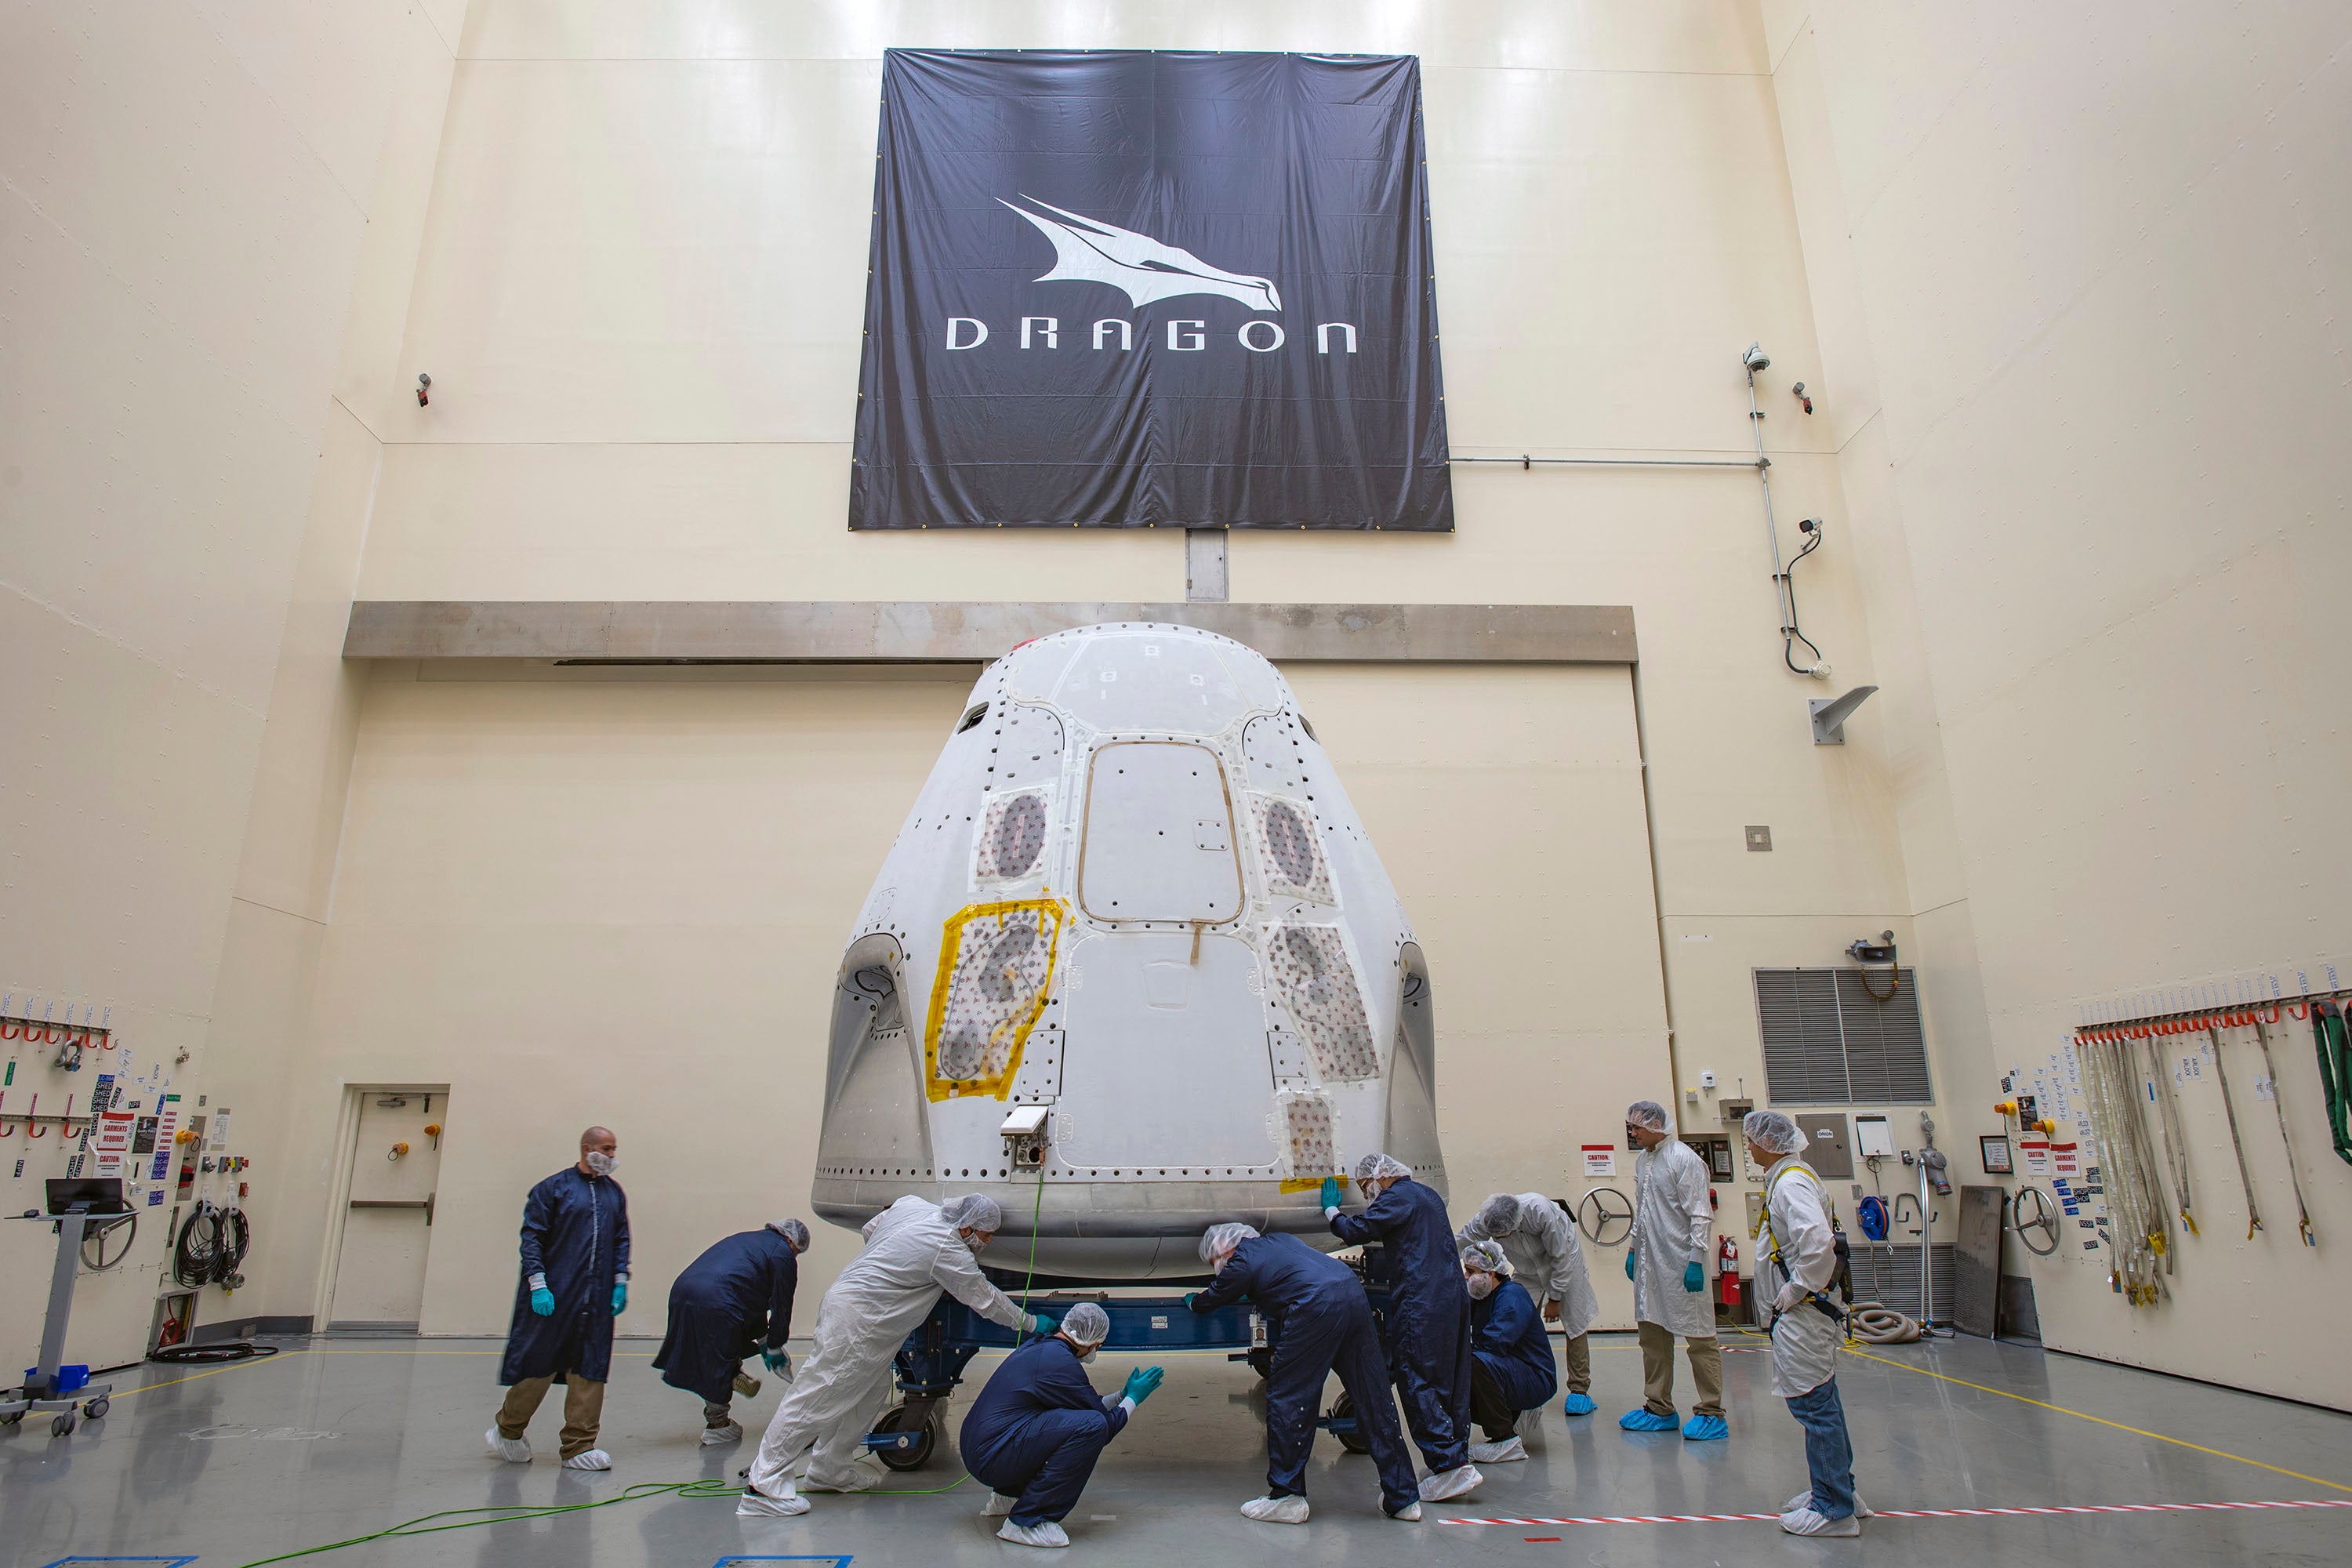 Crew Dragon arrived to Florida, will undergo preparations ahead of SpaceX's first manned mission